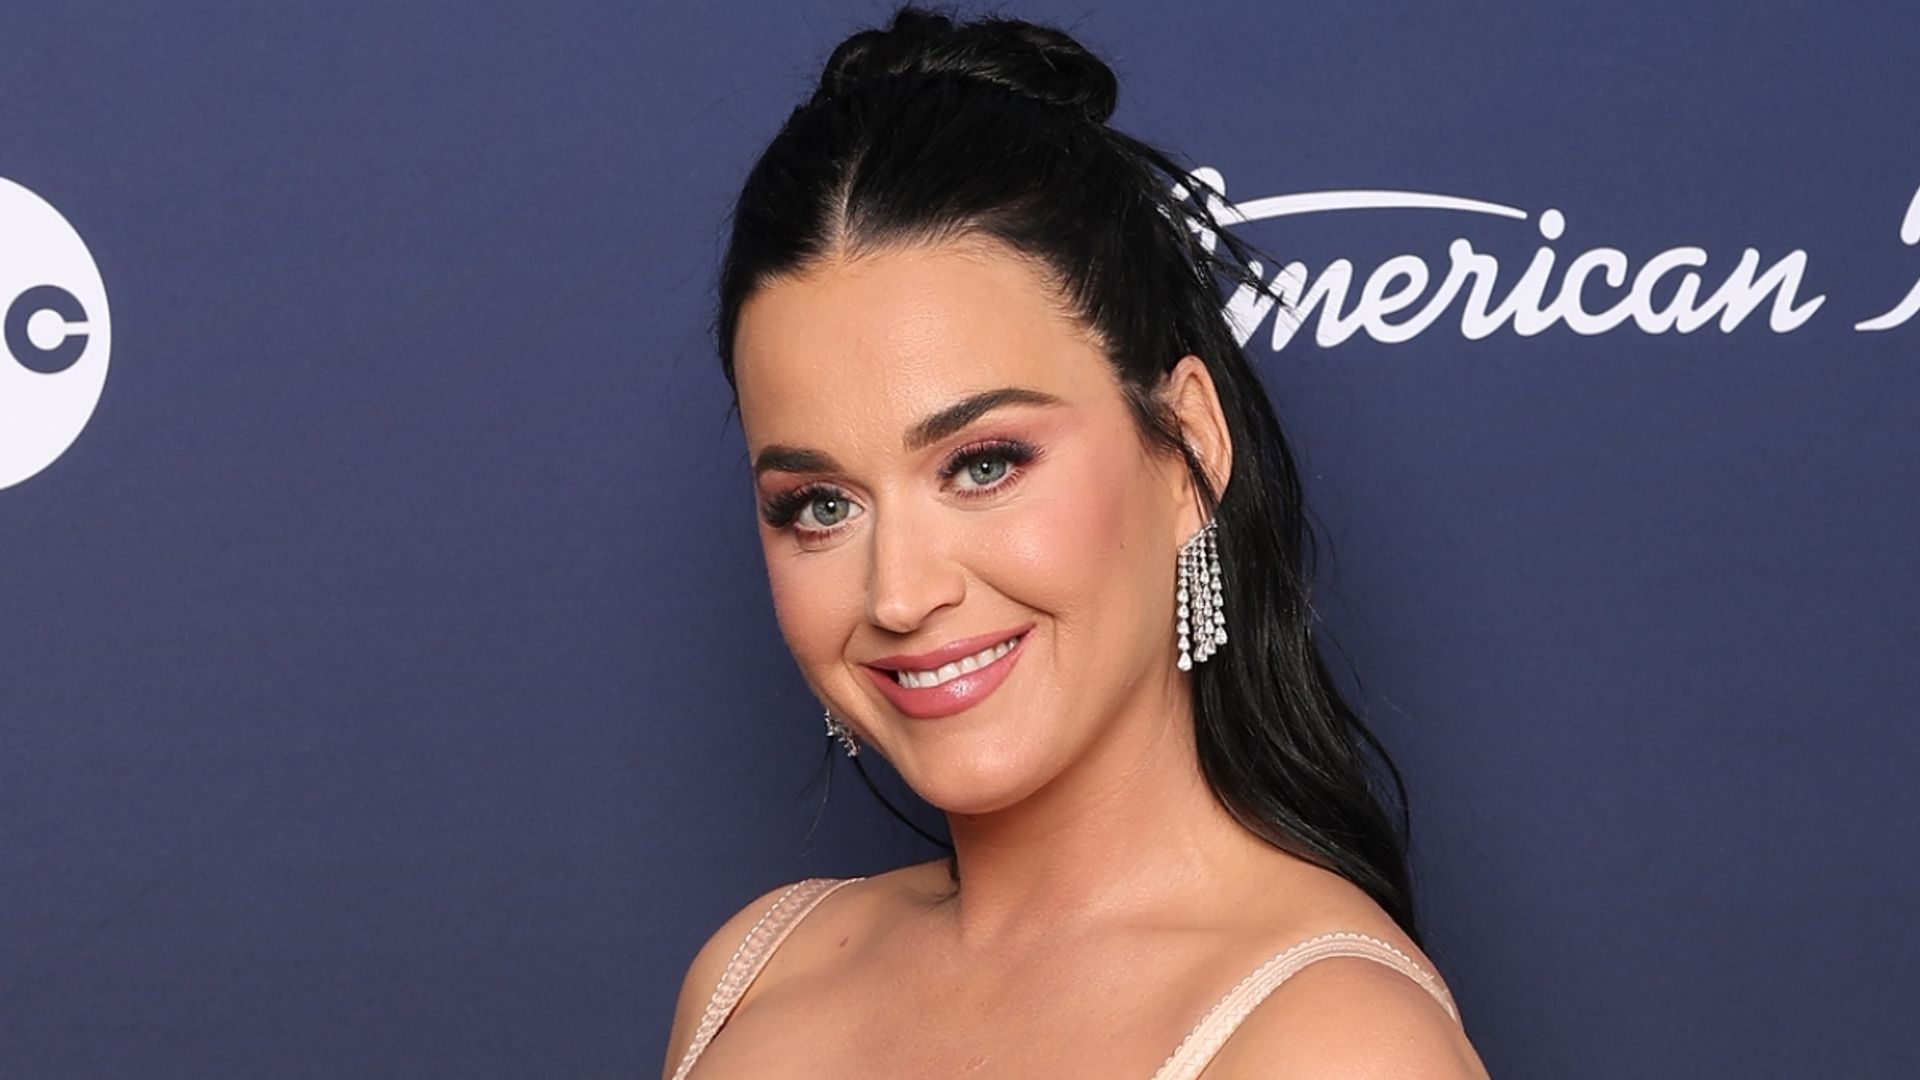 Katy Perry debuts very familiar appearance change alongside exciting ...